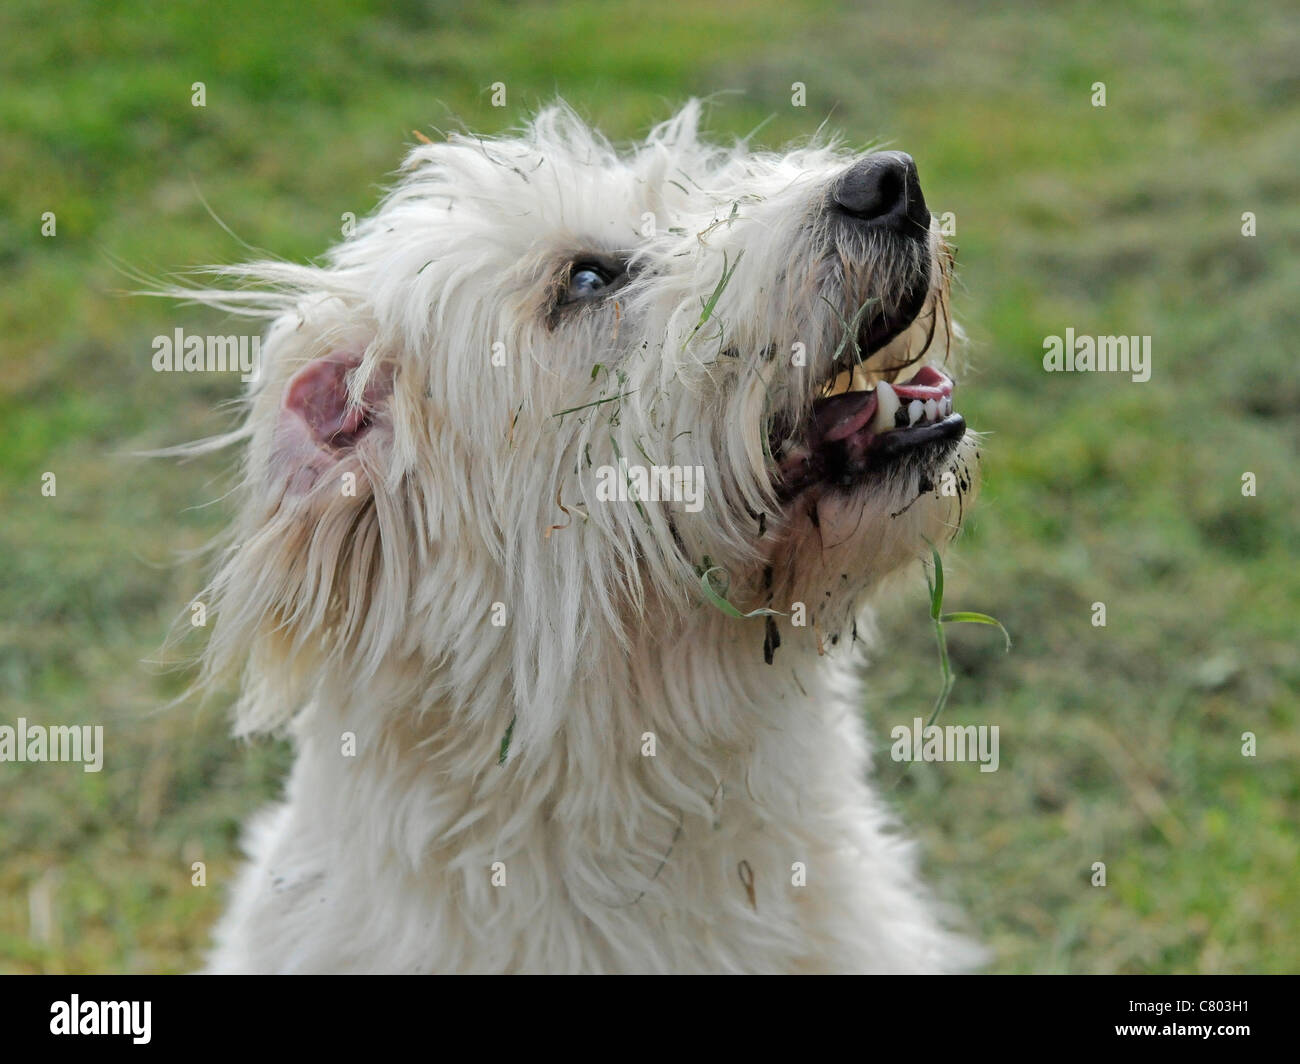 A happy dirty bichon frise that has been playing in the dirt Stock Photo